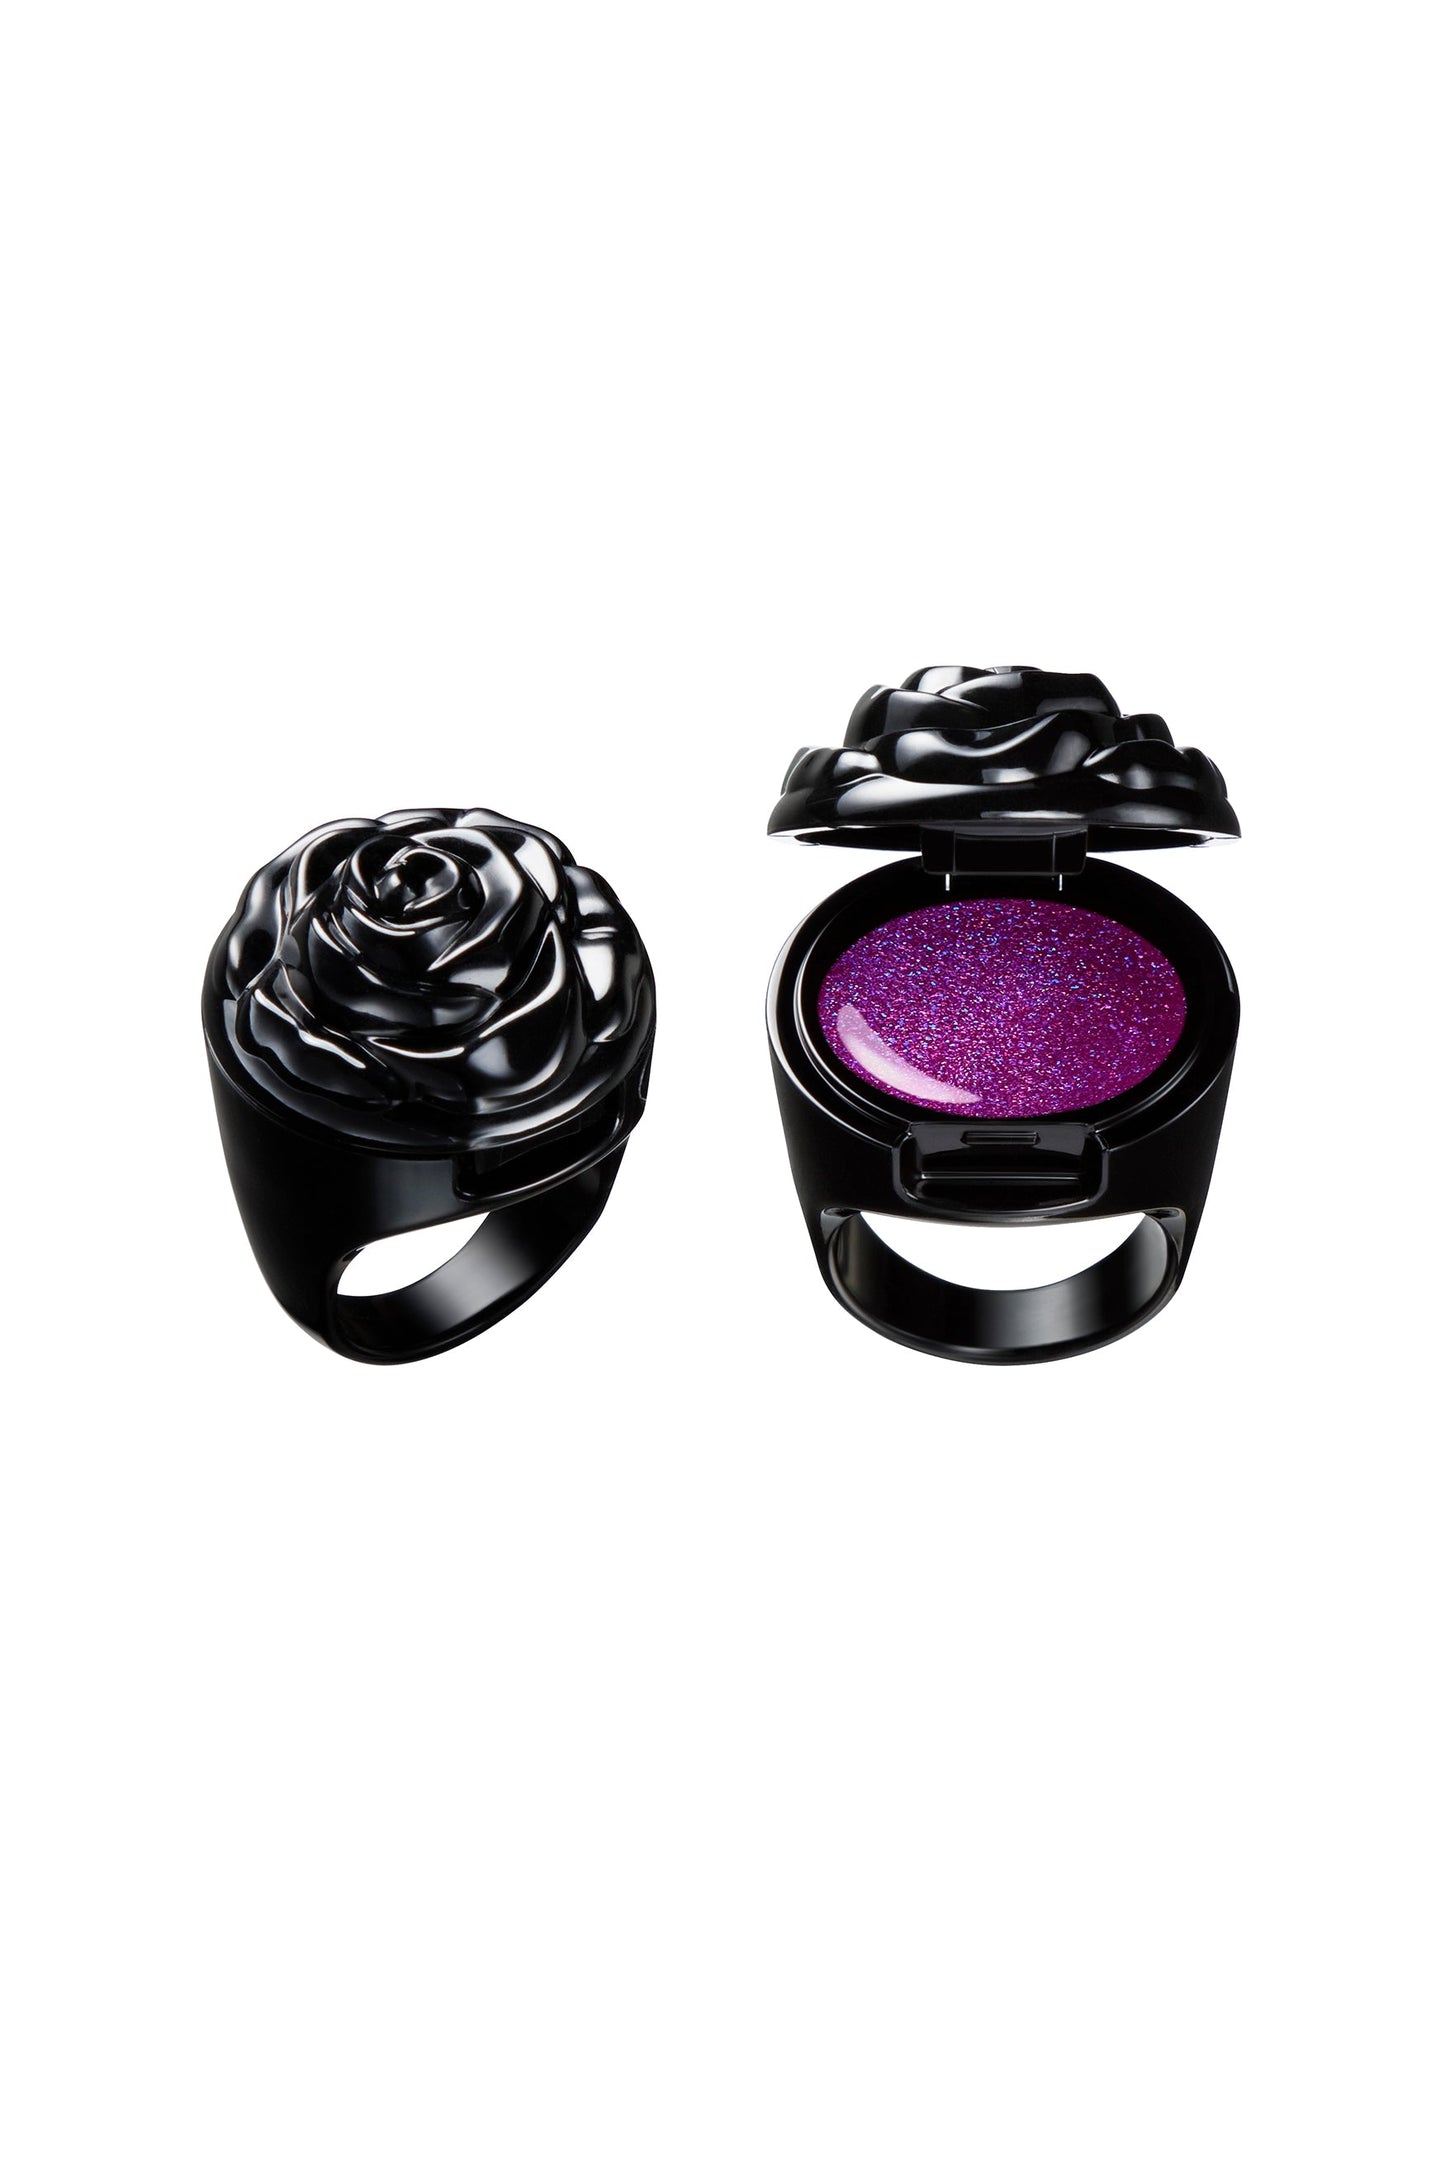 MYSTIC PURPLE in a black ring container, black rose as a cap, makeup inside